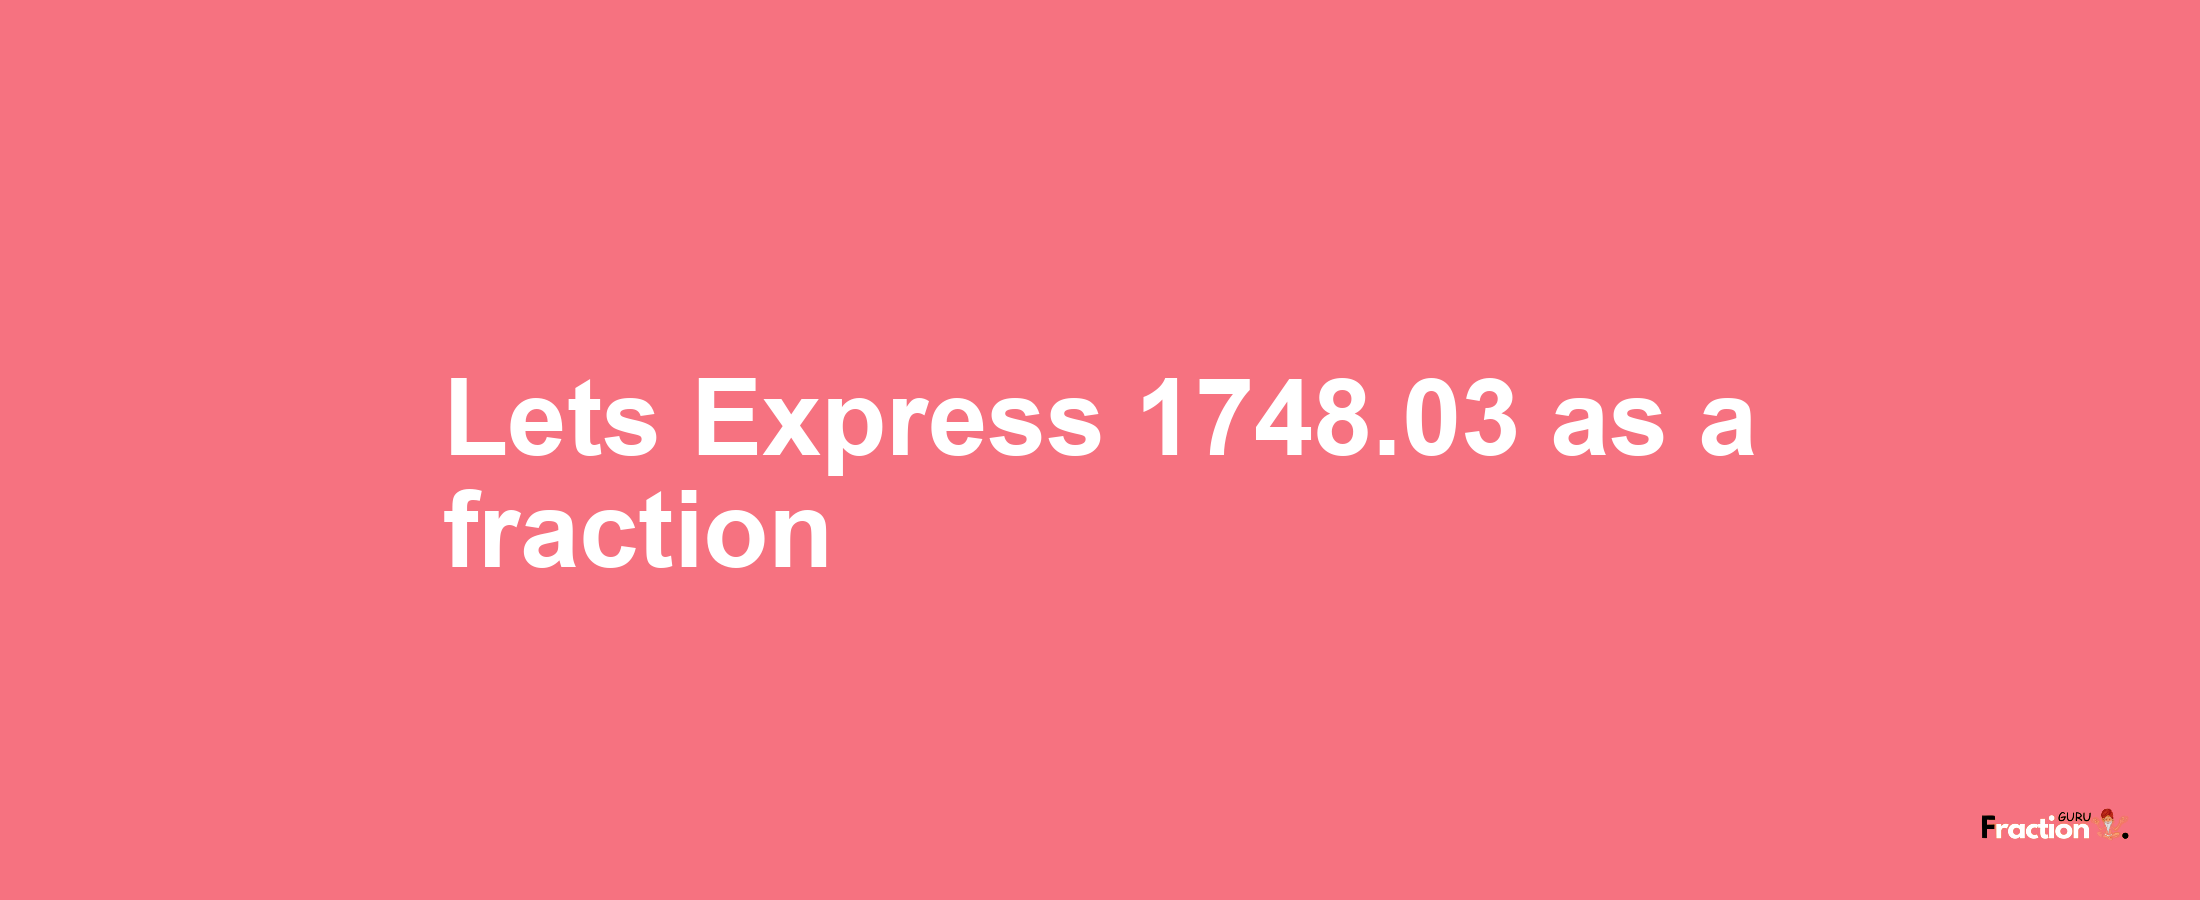 Lets Express 1748.03 as afraction